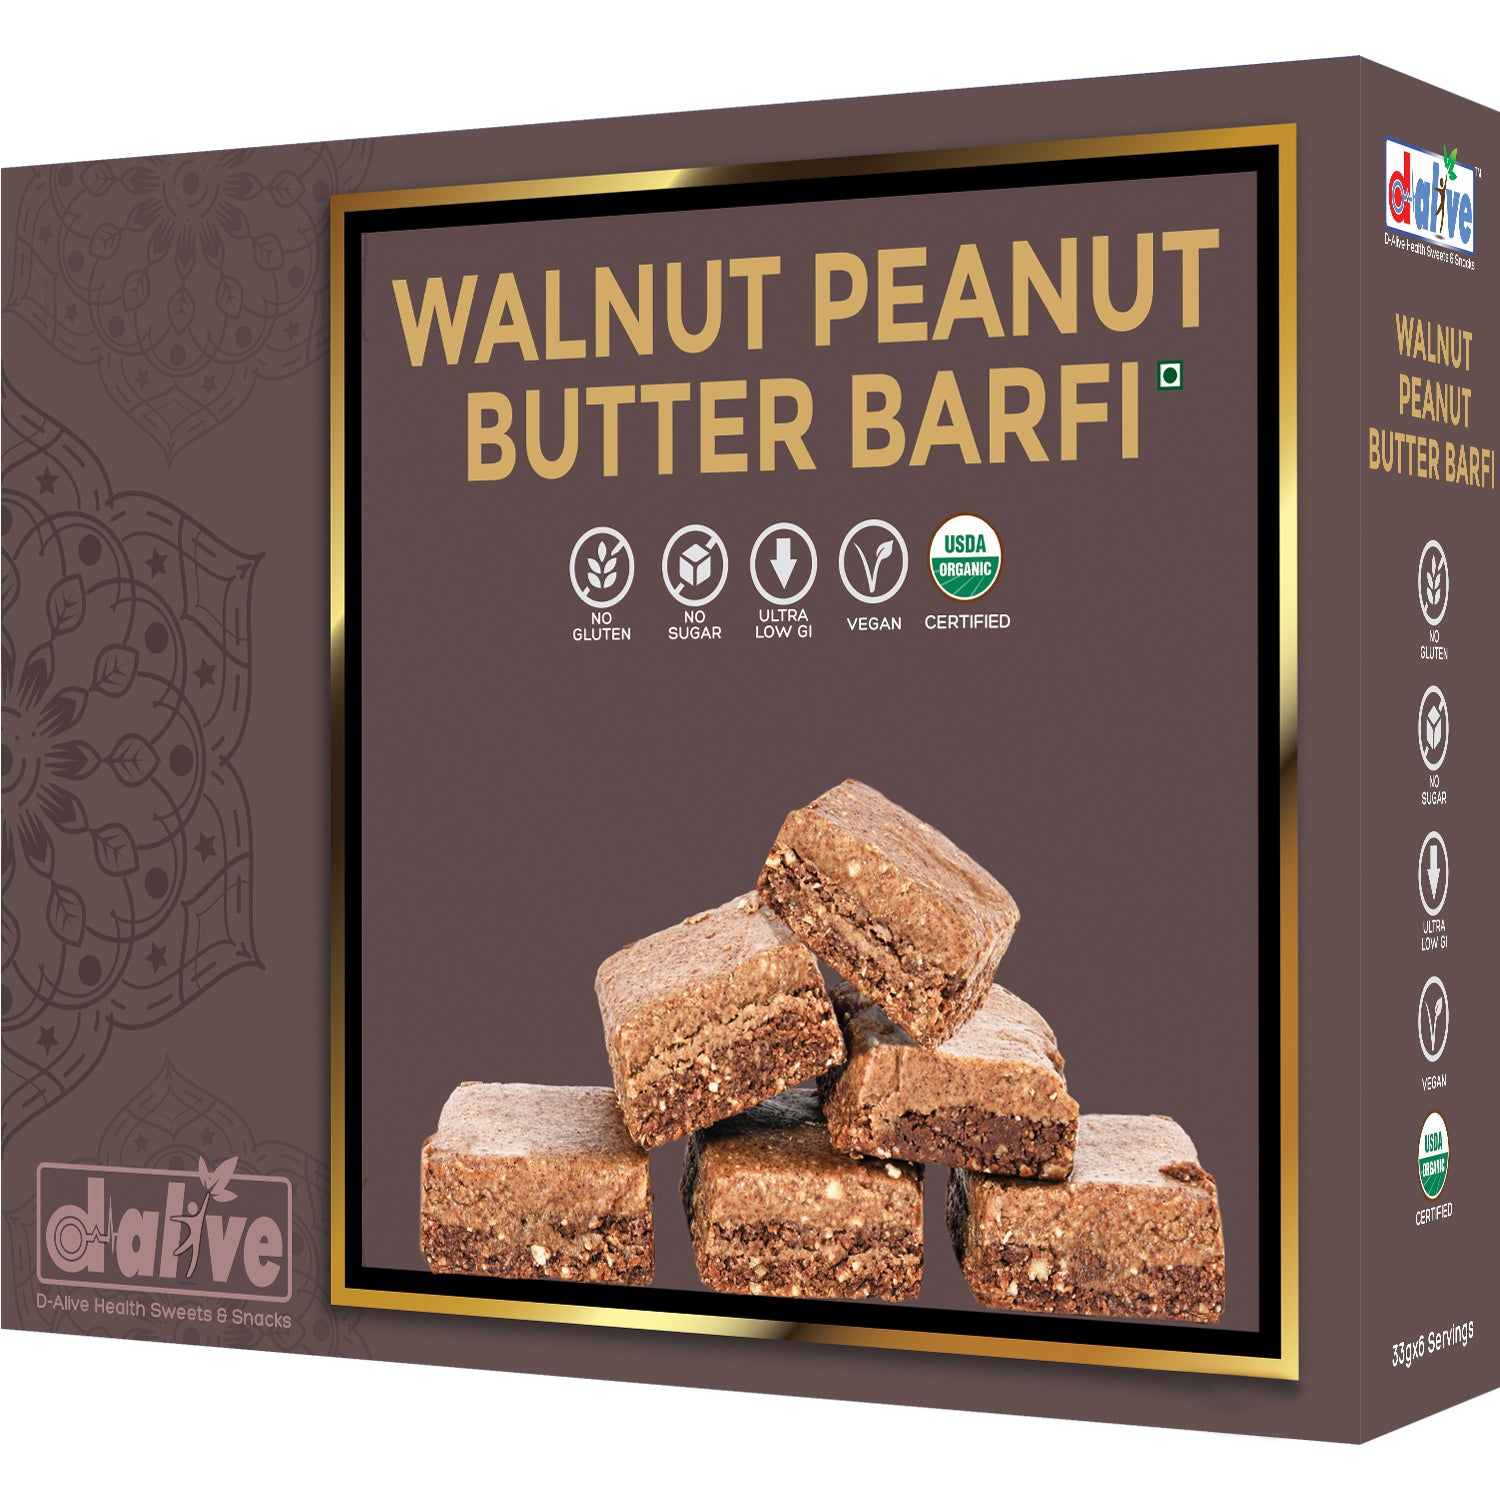 D-Alive Walnut Peanut Butter Barfi - 200g (Organic Certified, Gluten-Free, Vegan, Natural Sweeteners, Non-GMO, No Preservatives, No Trans Fat, No Additives, Low Carb & High Protein)